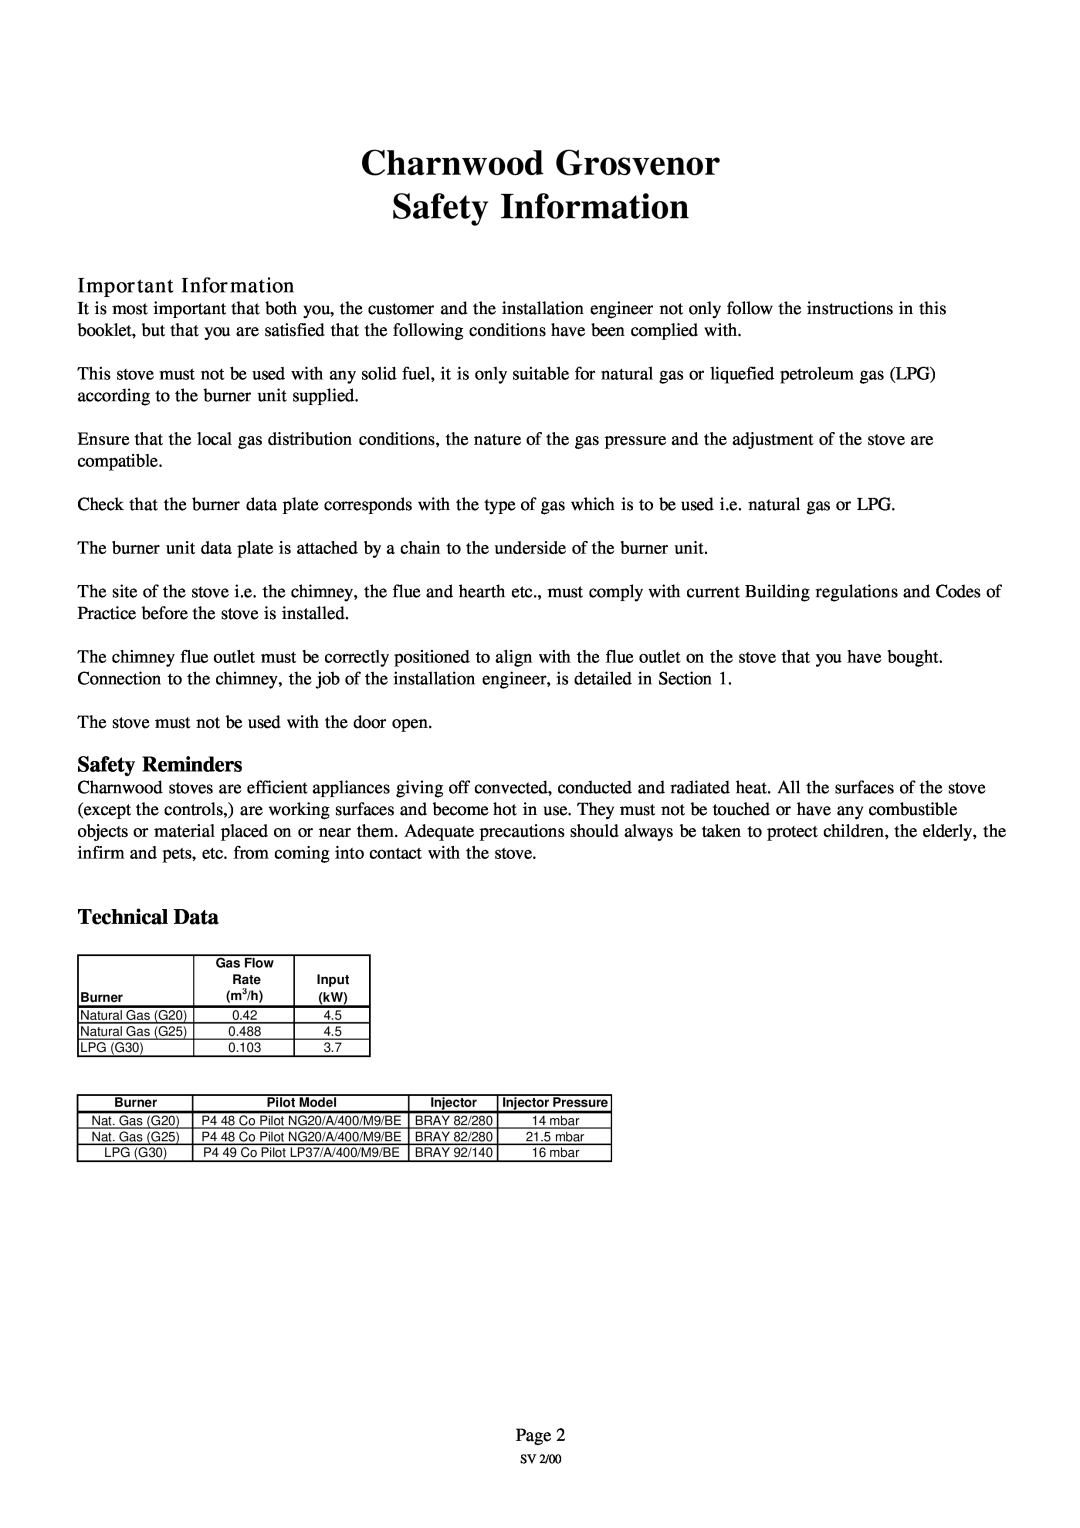 Charnwood Charnwood Grosvenor Safety Information, Important Information, Safety Reminders, Technical Data 